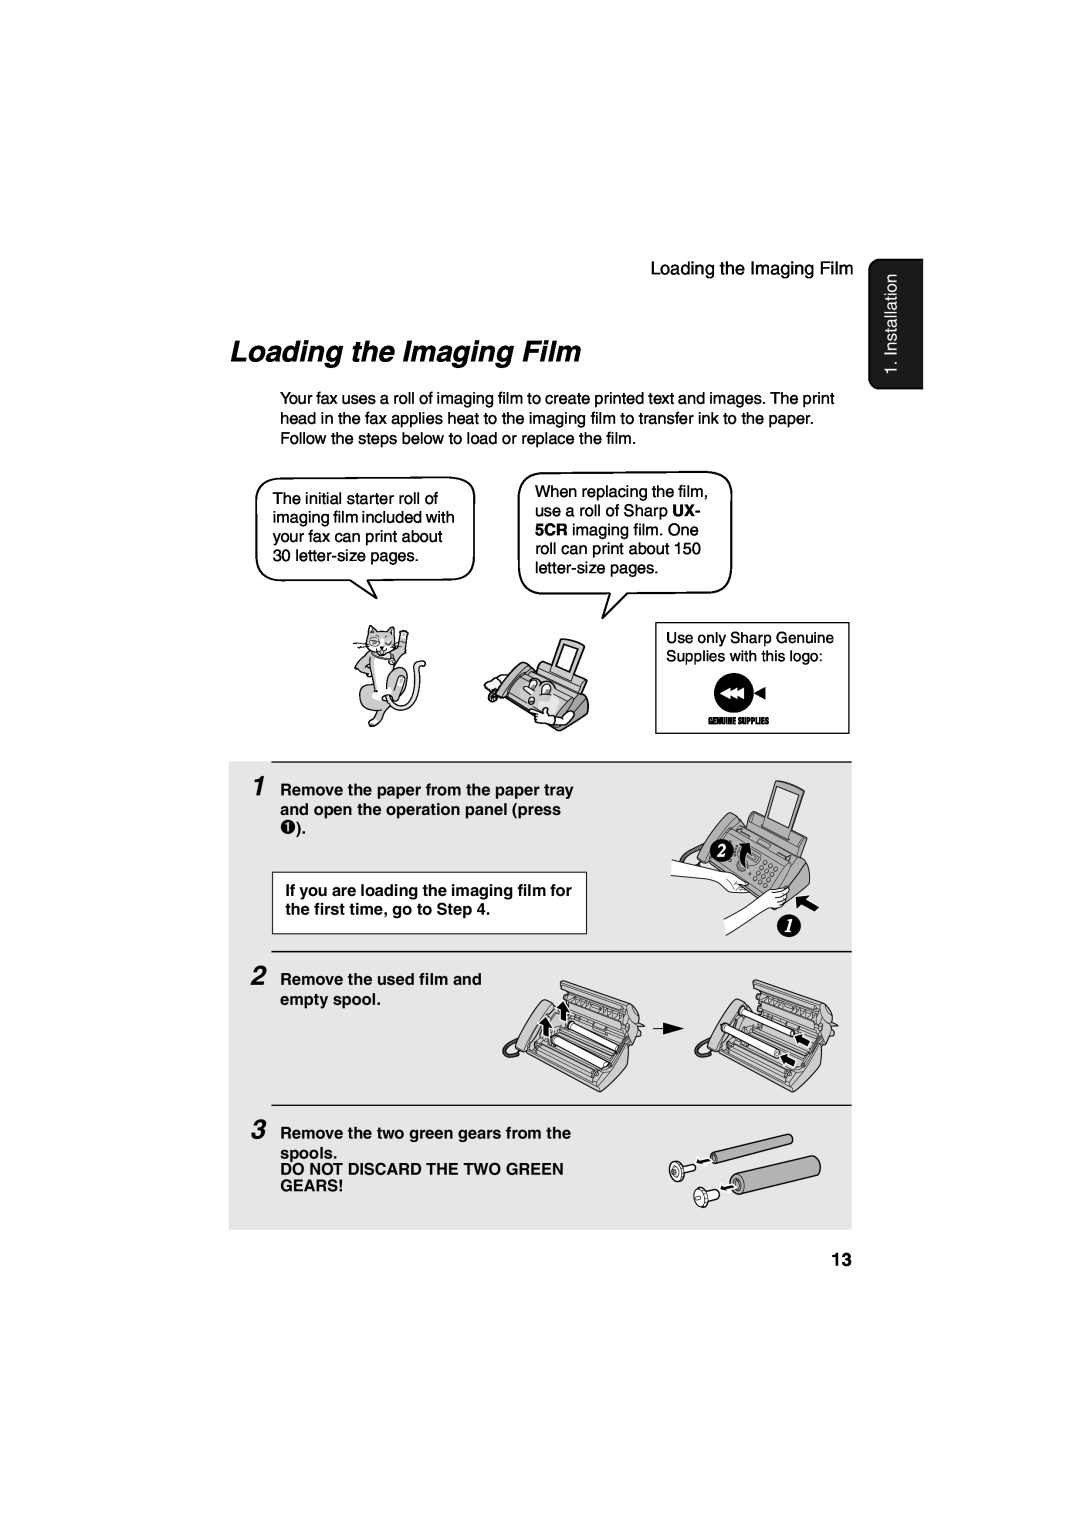 Sharp UX-A260 manual Loading the Imaging Film, Installation 